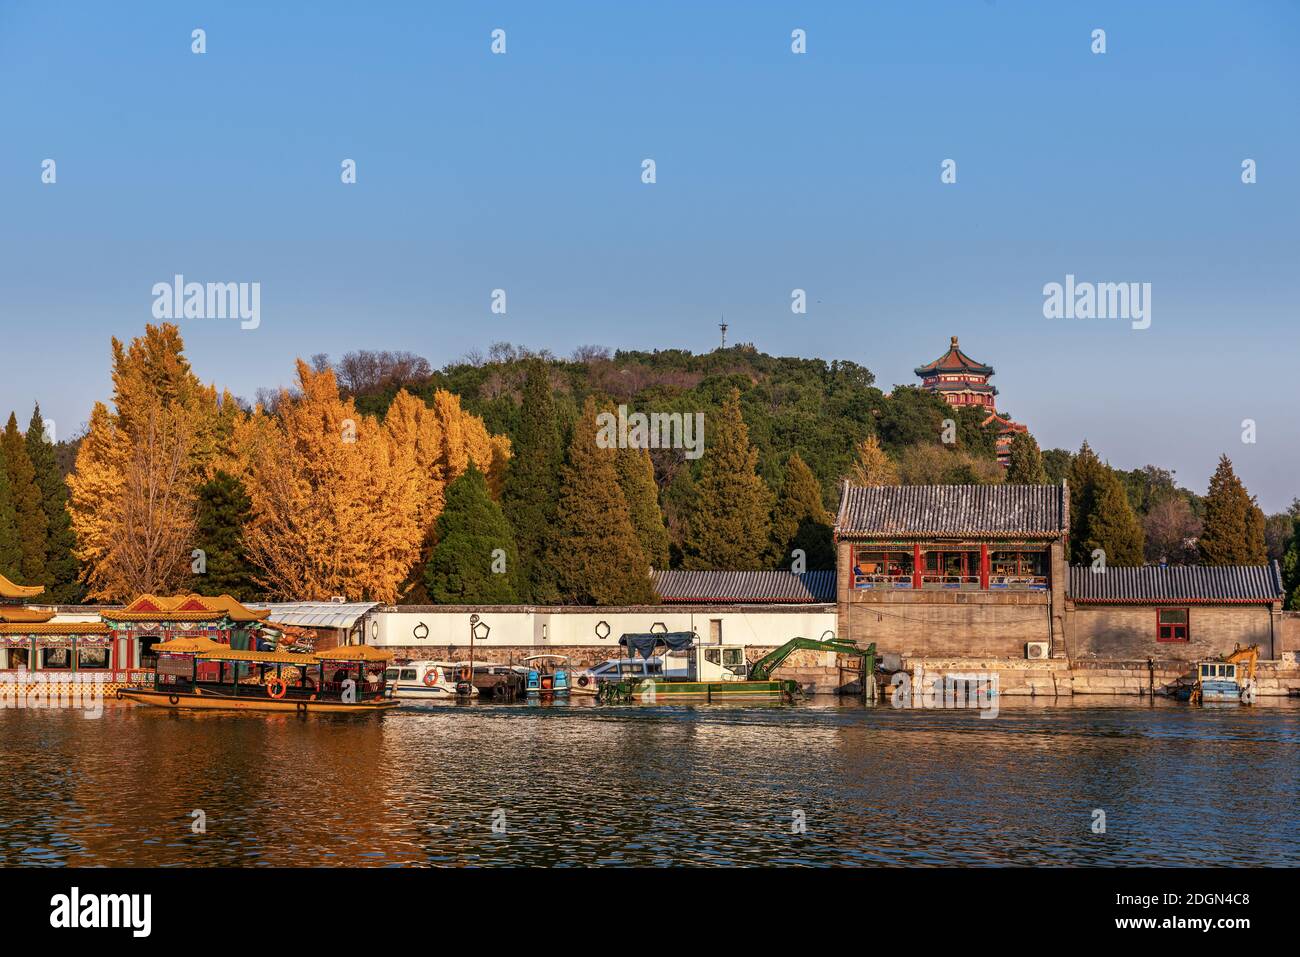 Trees turn into yellow or red within the Summer Palace, a vast ensemble of lakes, gardens and palaces, as autumns comes, making them a wonderful scene Stock Photo